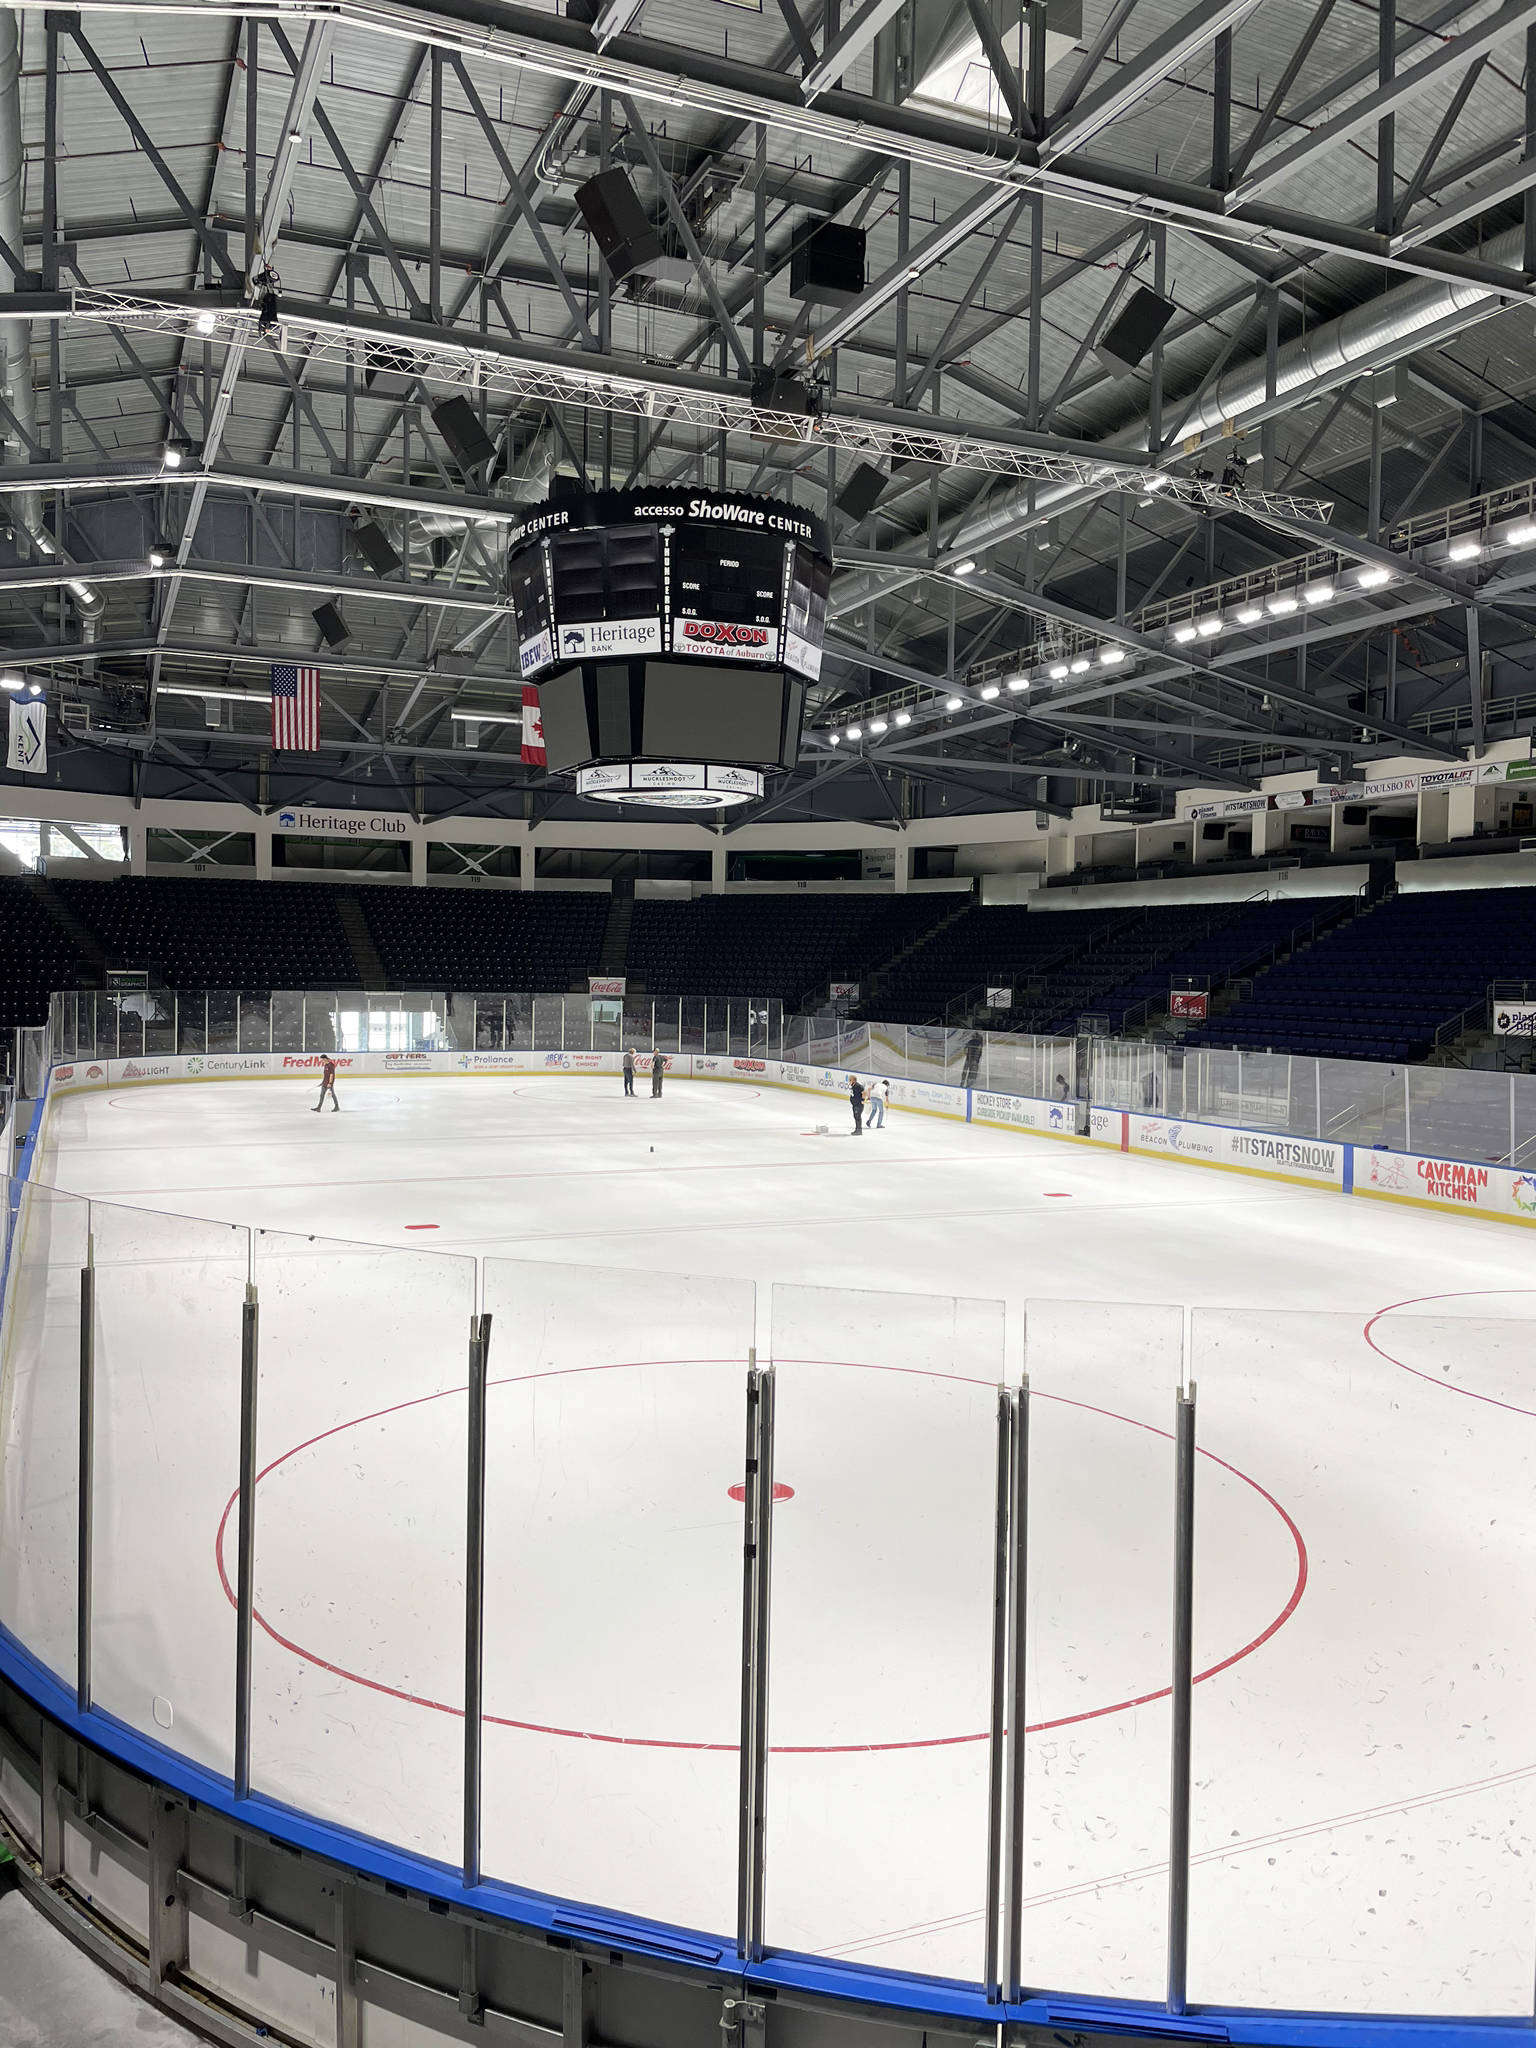 The accesso ShoWare Center in Kent will receive about $3 million in repairs and upgrades over the next five years. COURTESY PHOTO, Seattle Thunderbirds